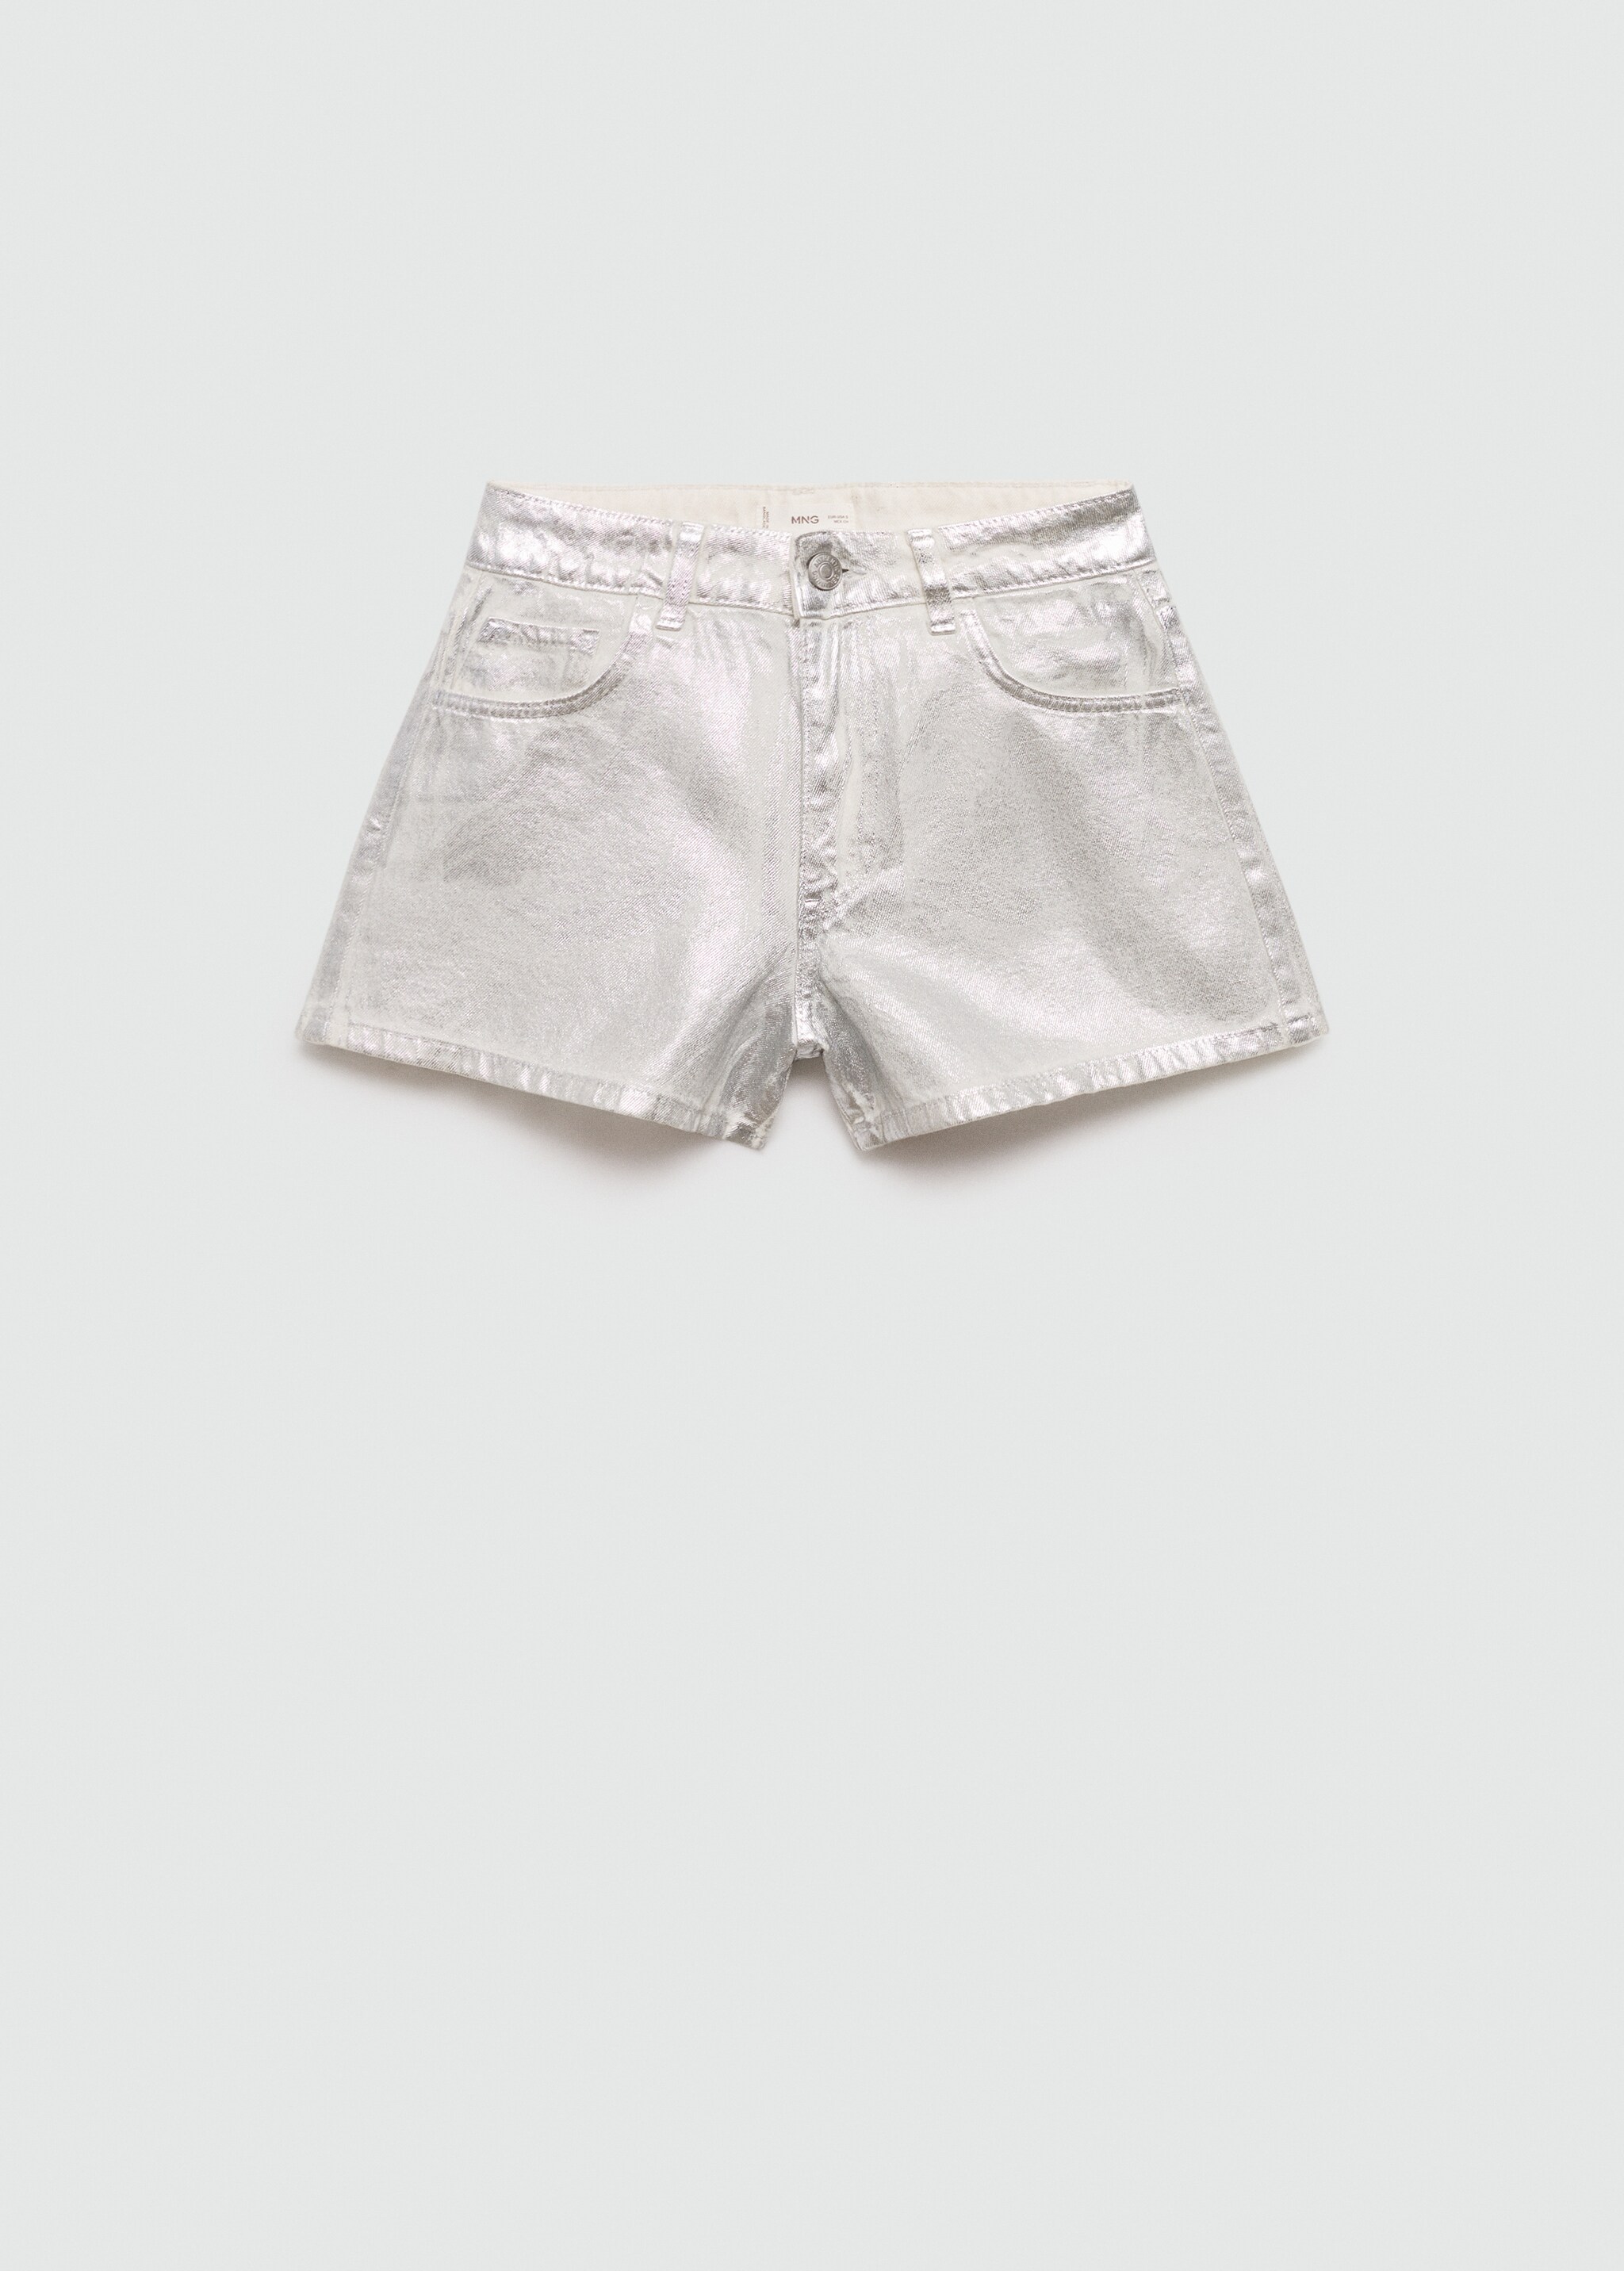 Metallic shorts - Article without model